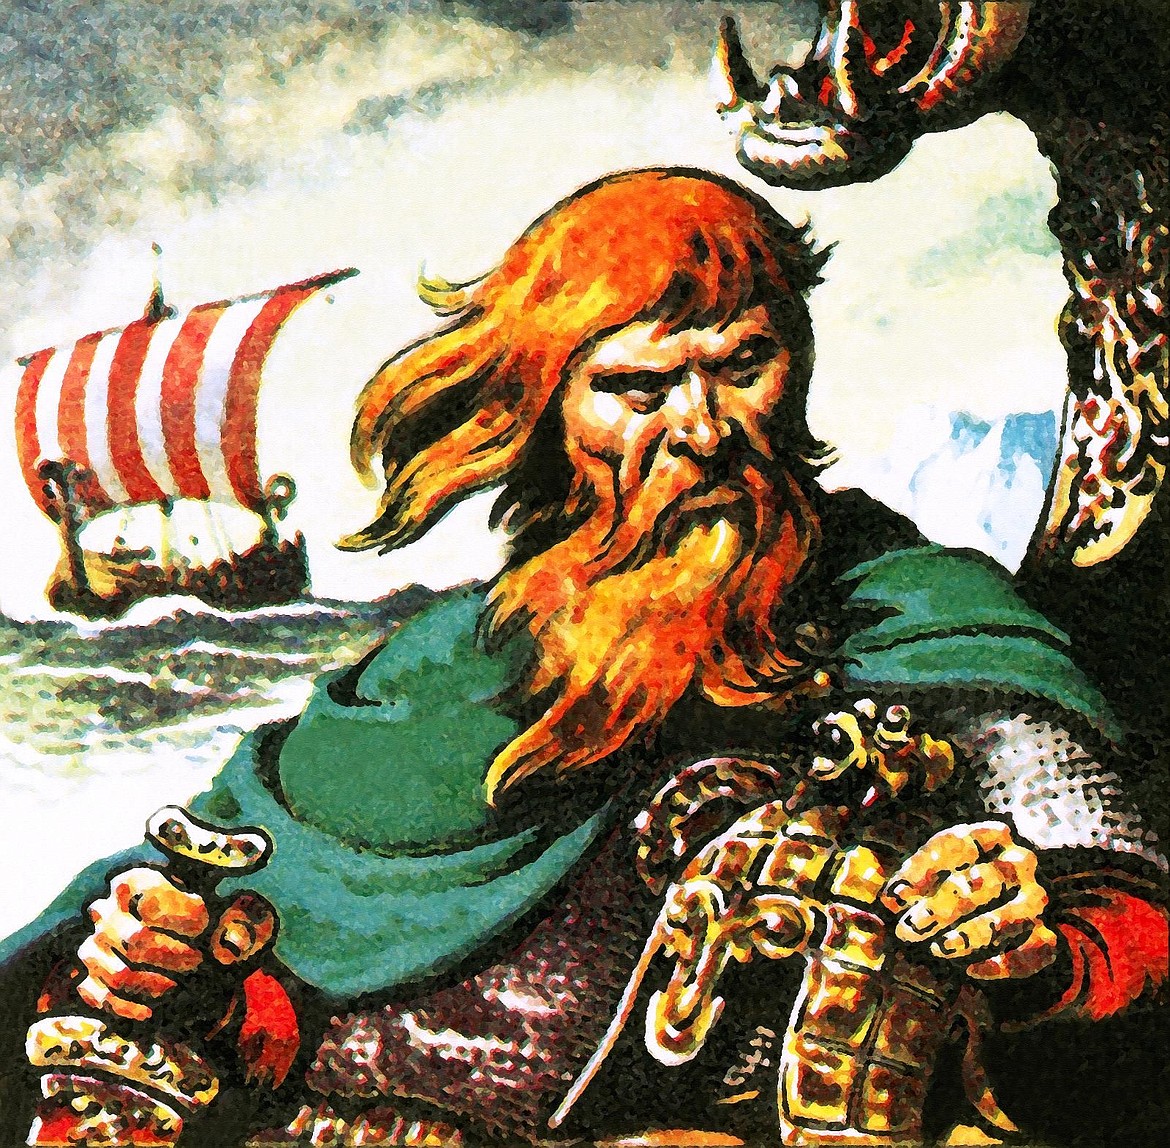 Erik the Red (“Father of the Vikings”) who lived c.AD 950 to c.1003 was not a plunderer, instead explored the northwest Atlantic while serving a three-year exile sentence for killing several men, and discovered Greenland, which he colonized.